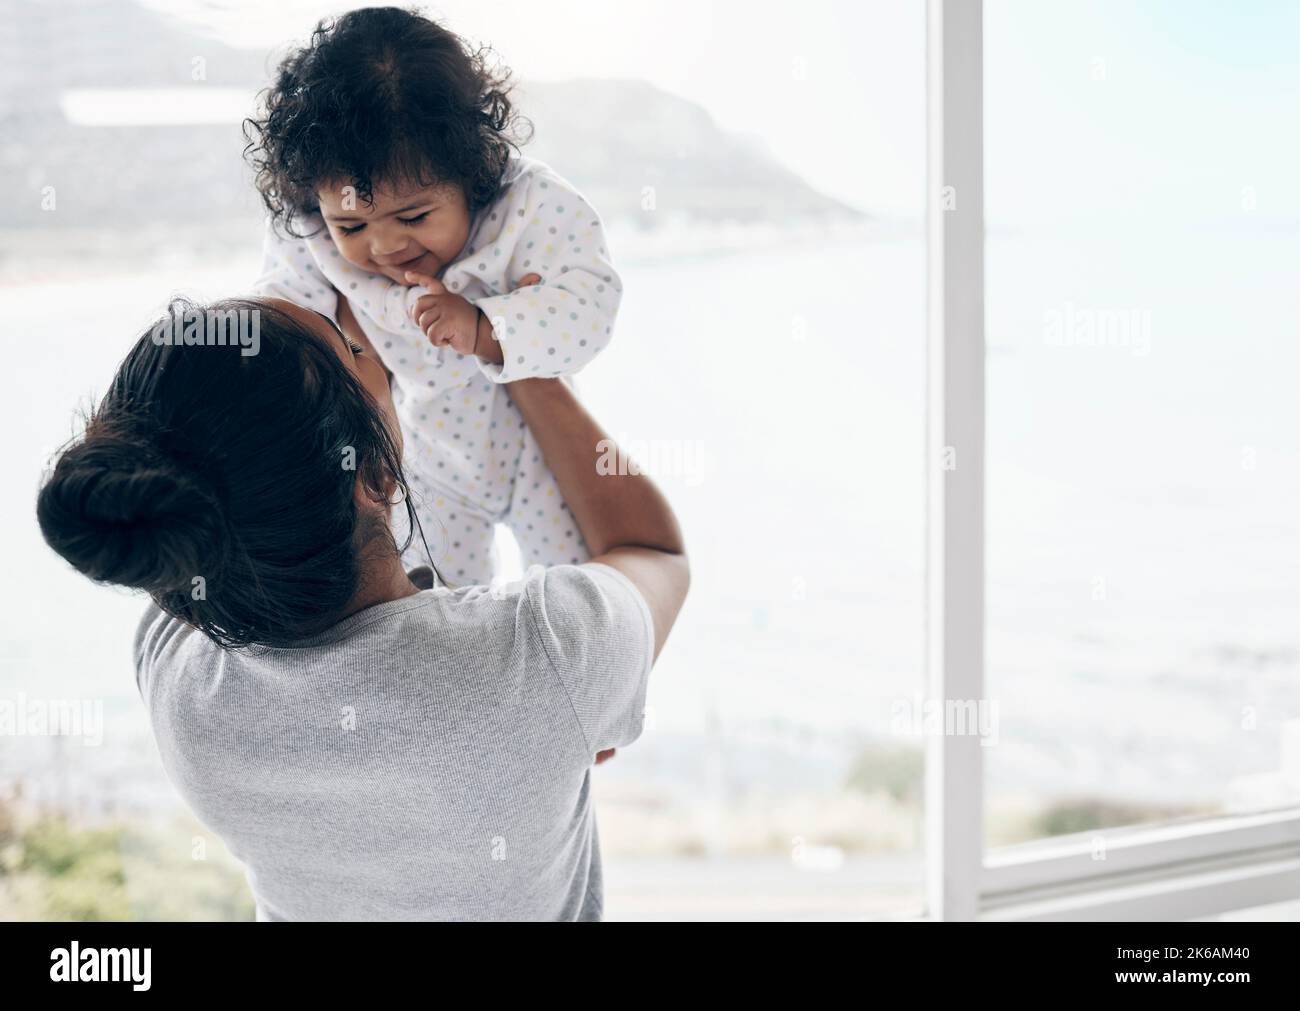 The little friend she never knew she needed. a mother holding her baby daughter at home. Stock Photo